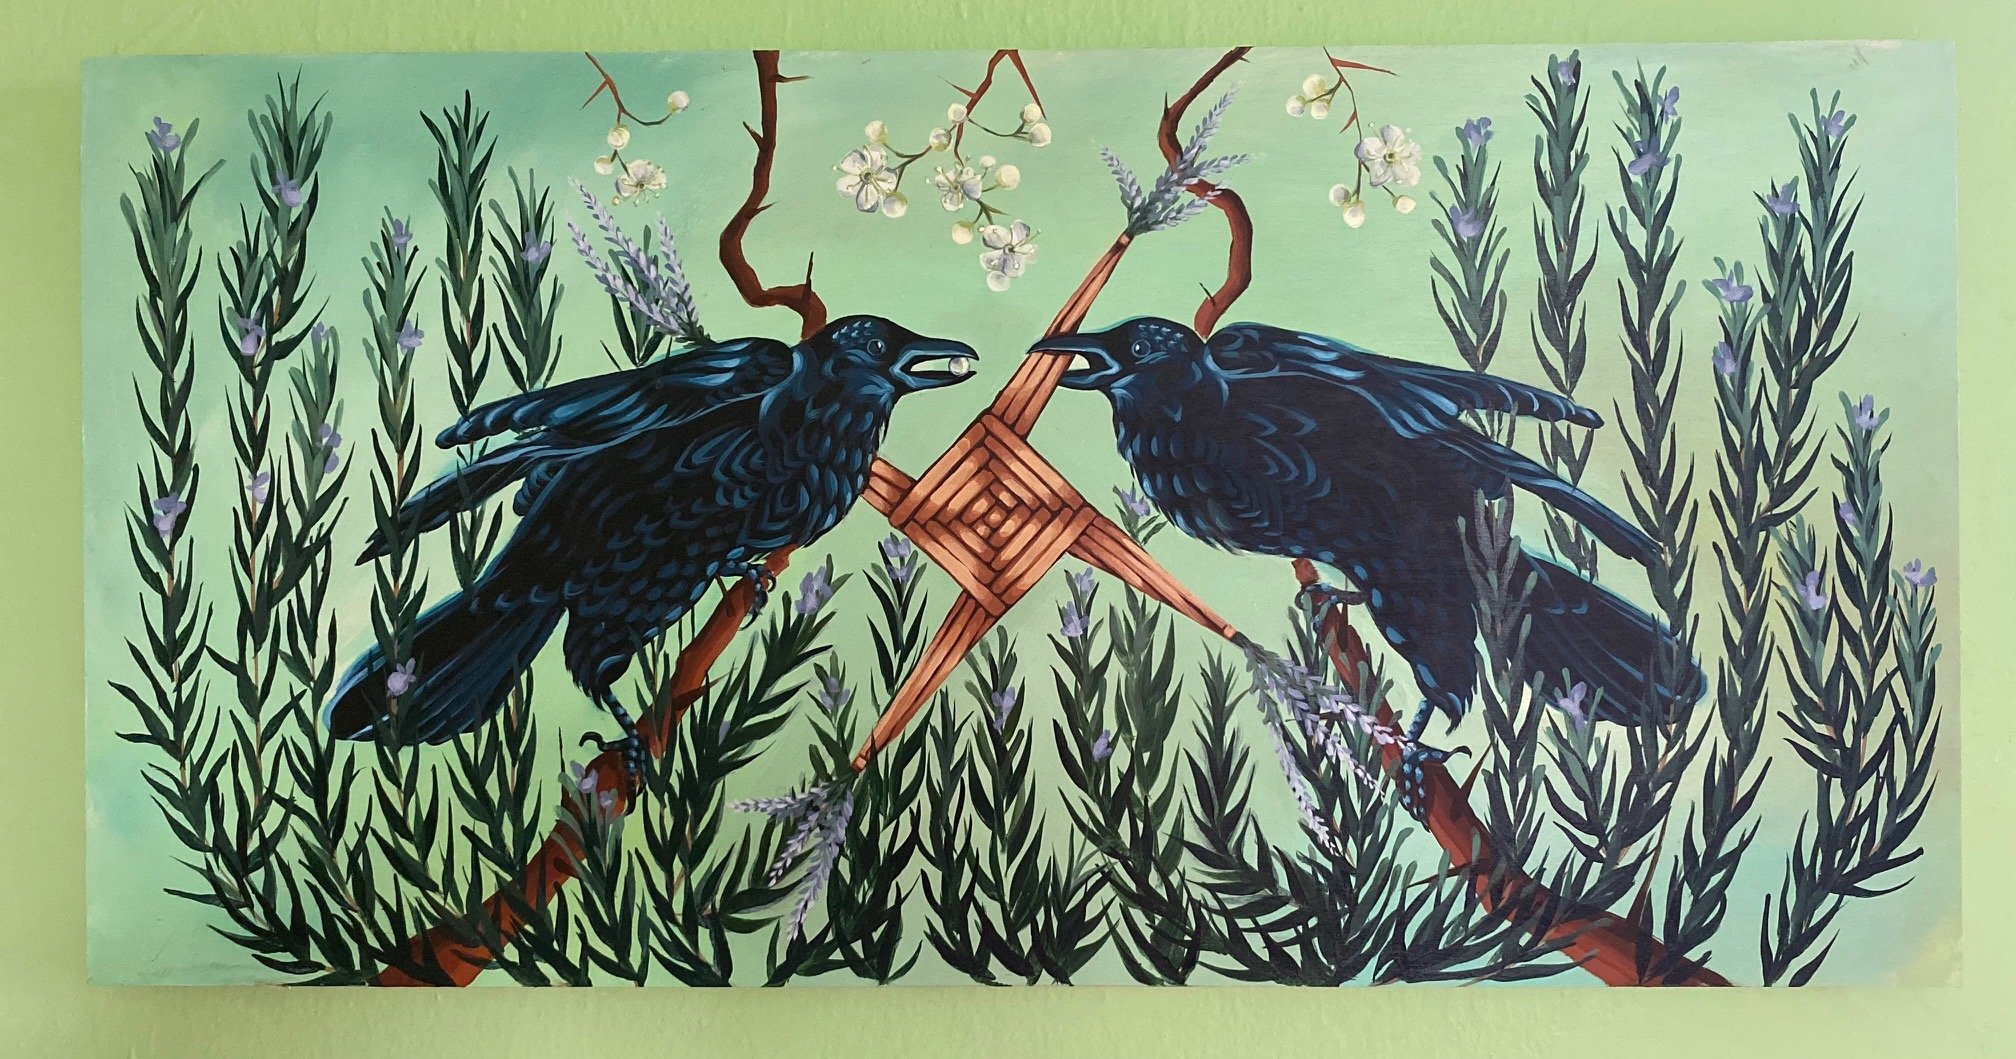 Imbolc (Crows Bear Brigid's Cross with Rosemary and Hawthorne)